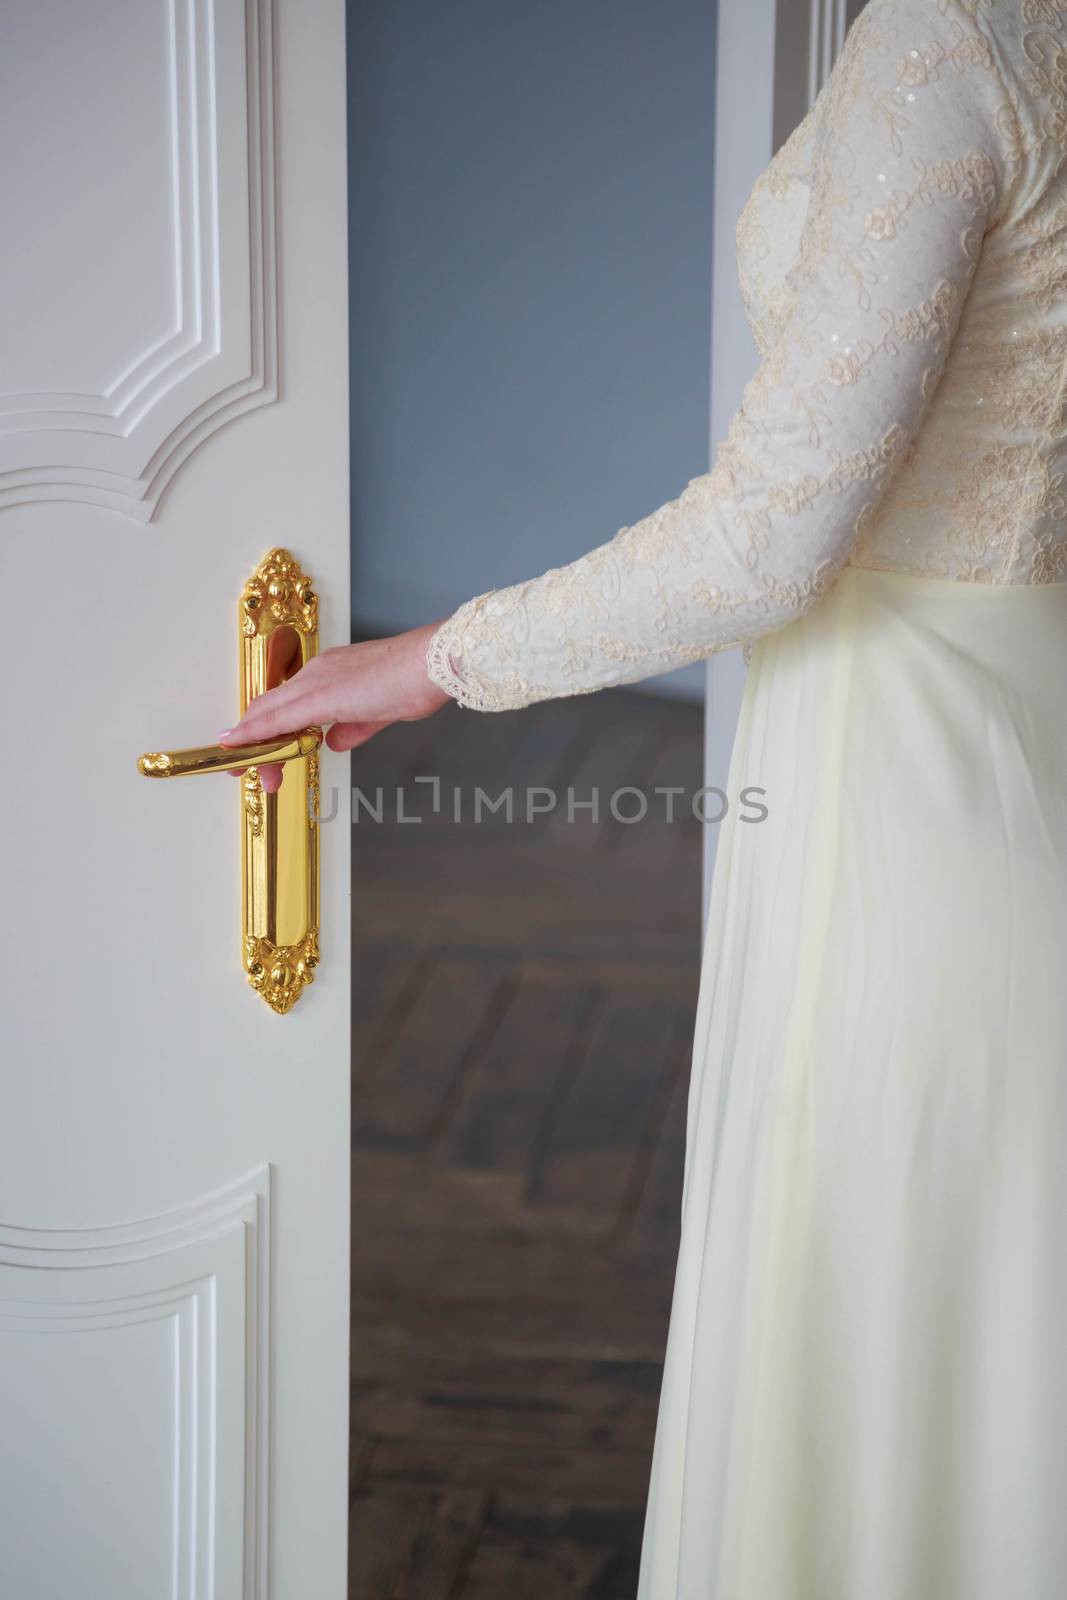 Close-up of the bride's hand opening the door to the wedding ceremony hall.